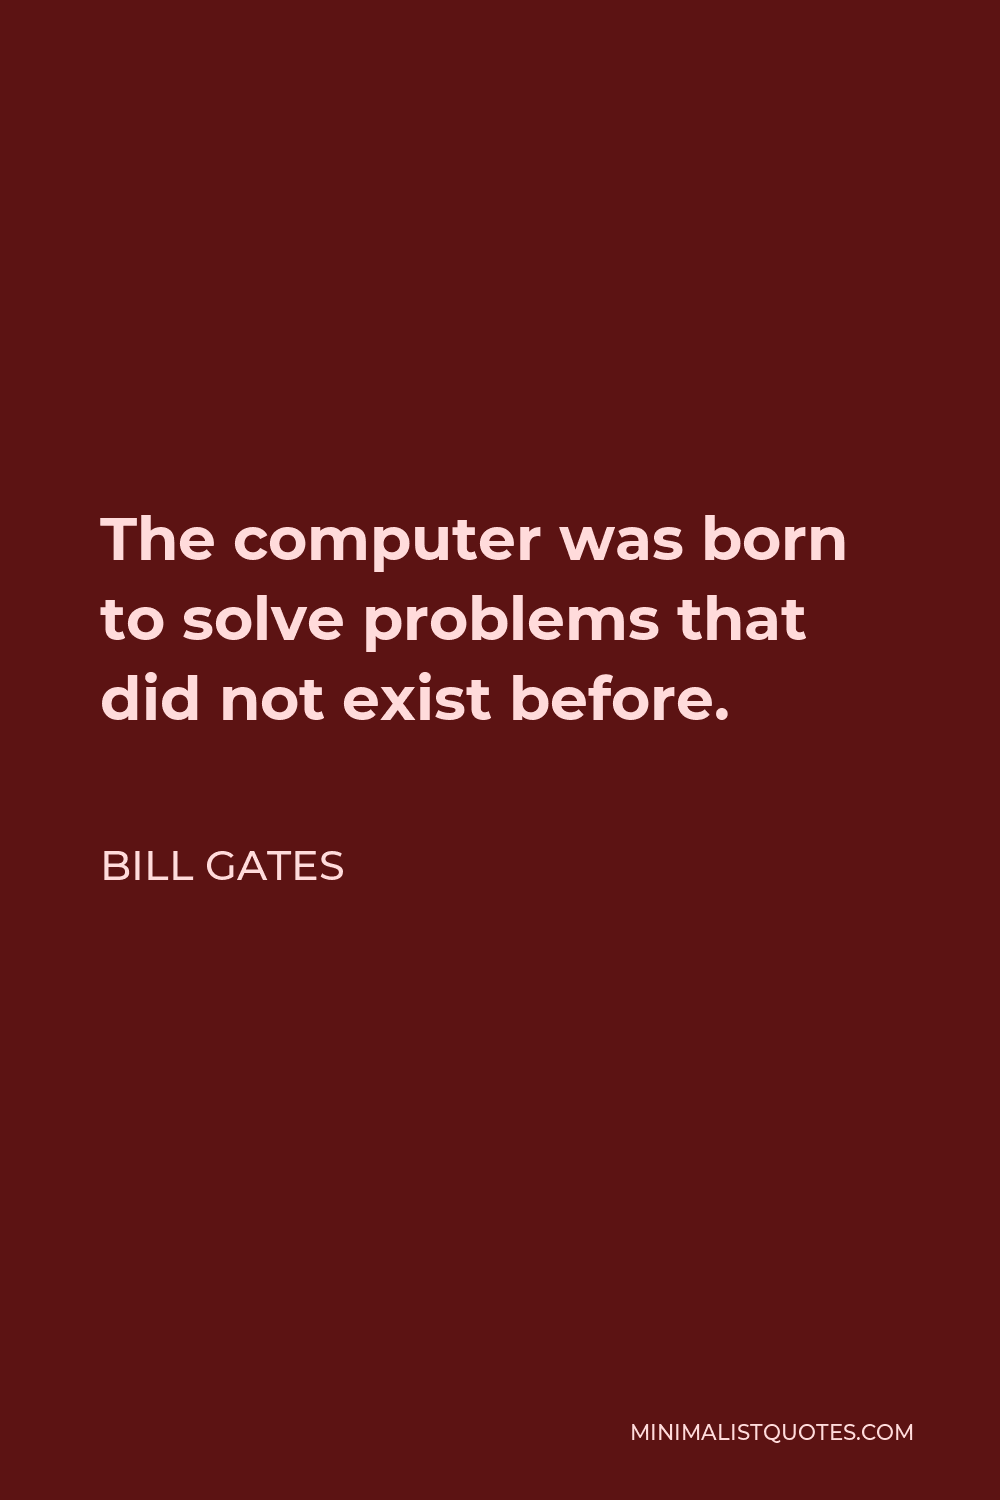 Bill Gates Quote - The computer was born to solve problems that did not exist before.